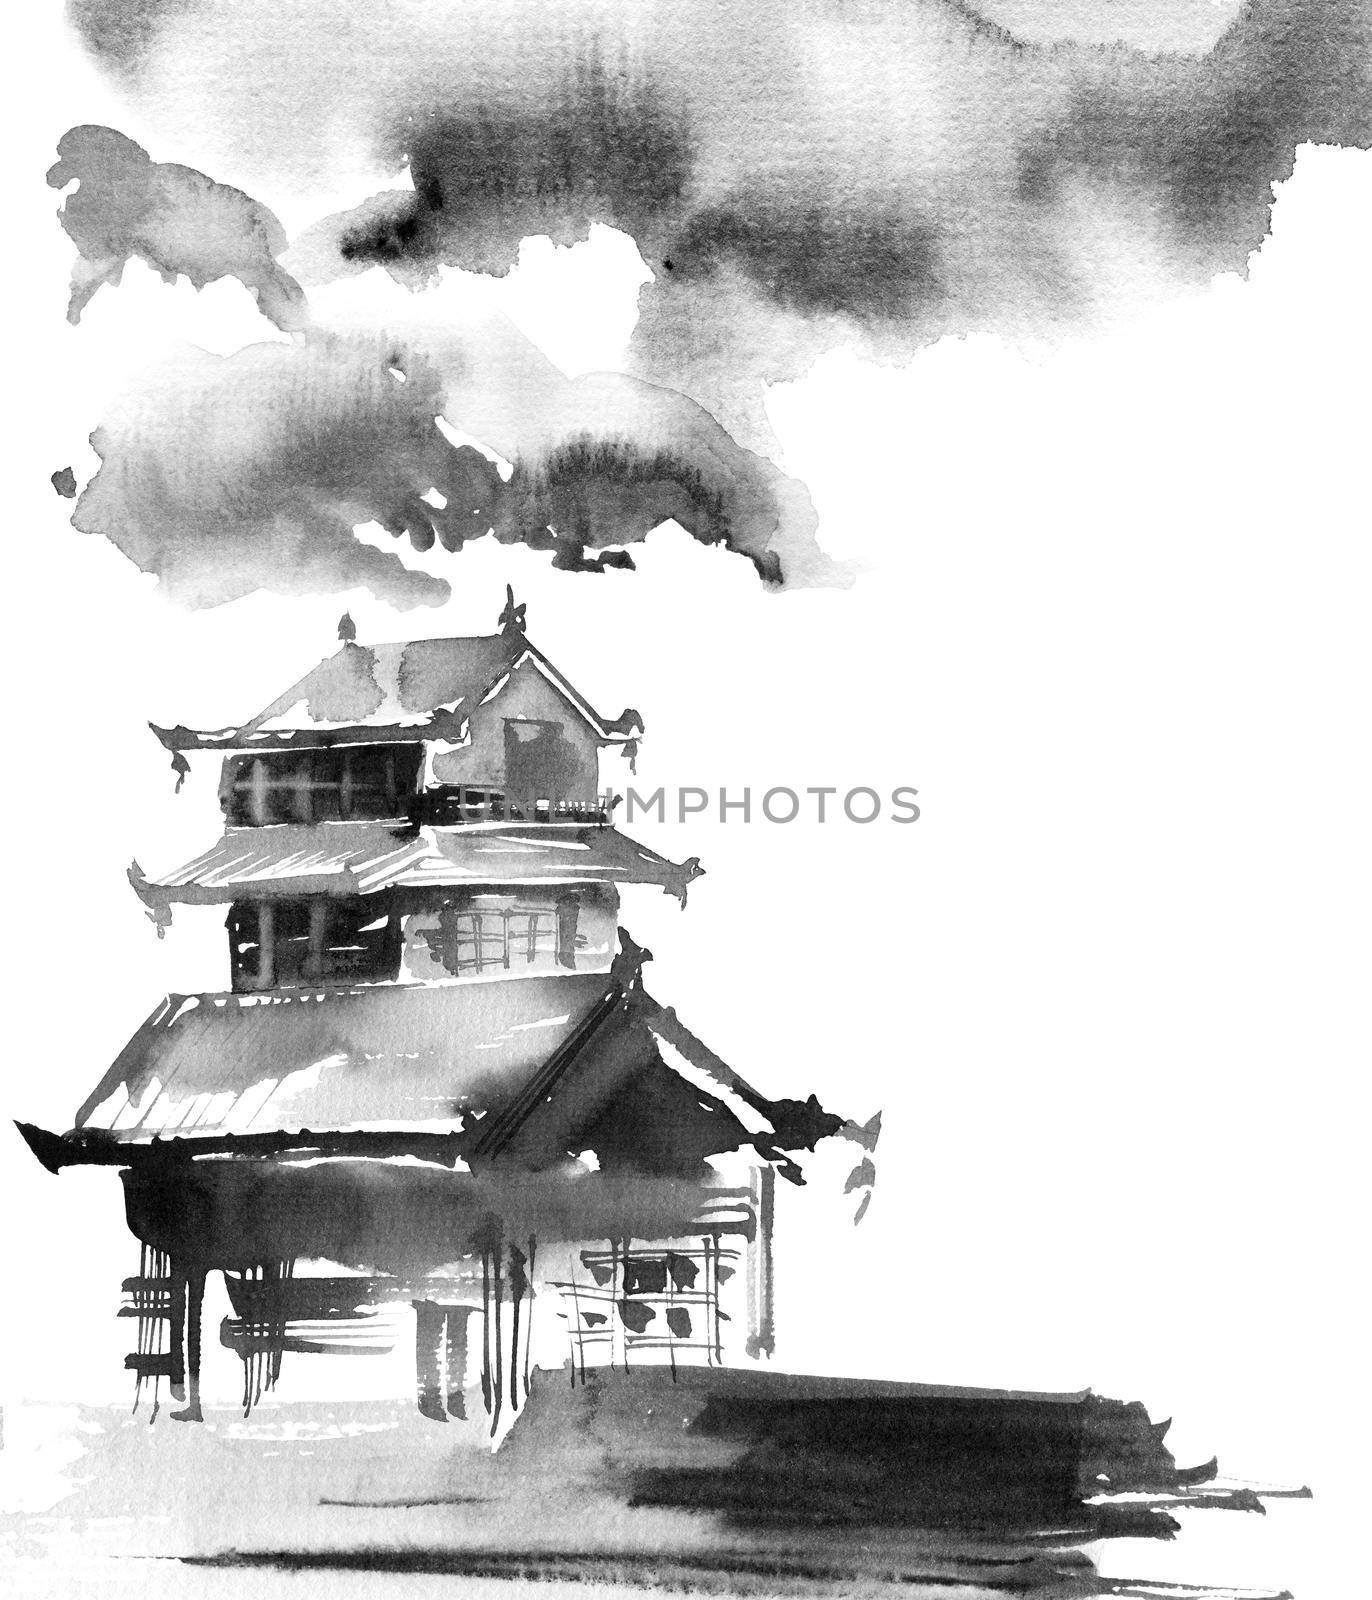 Traditional japanese building and cloudy sky on white background. Artistic painting by ink and watercolor in sumi-e style.